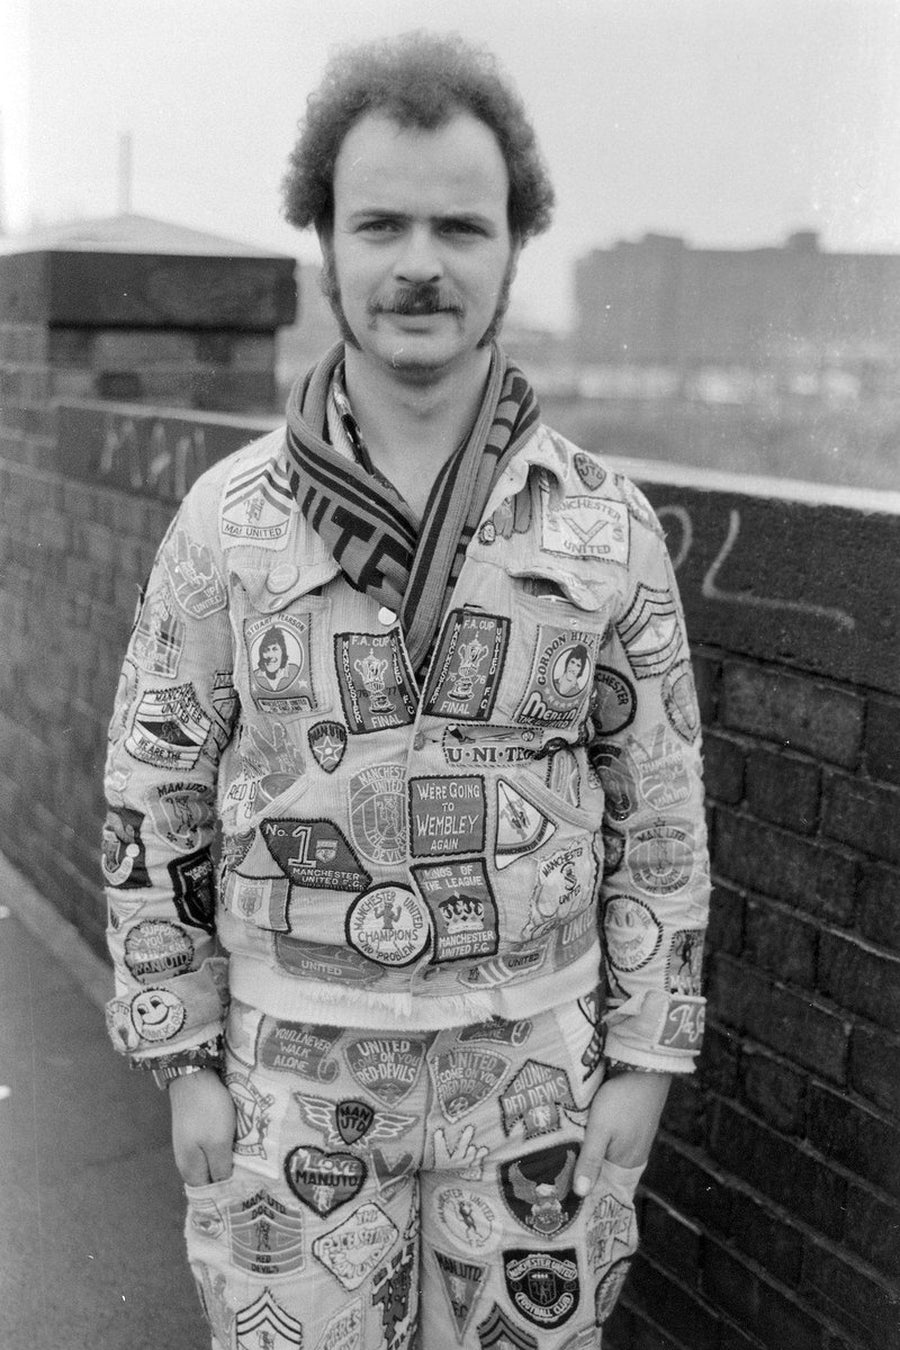 Manchester United Fan with Badges by Iain S. P. Reid, c. 1977. Copyright: Estate of Iain S.P. Reid. Not to be used for any purpose without permission